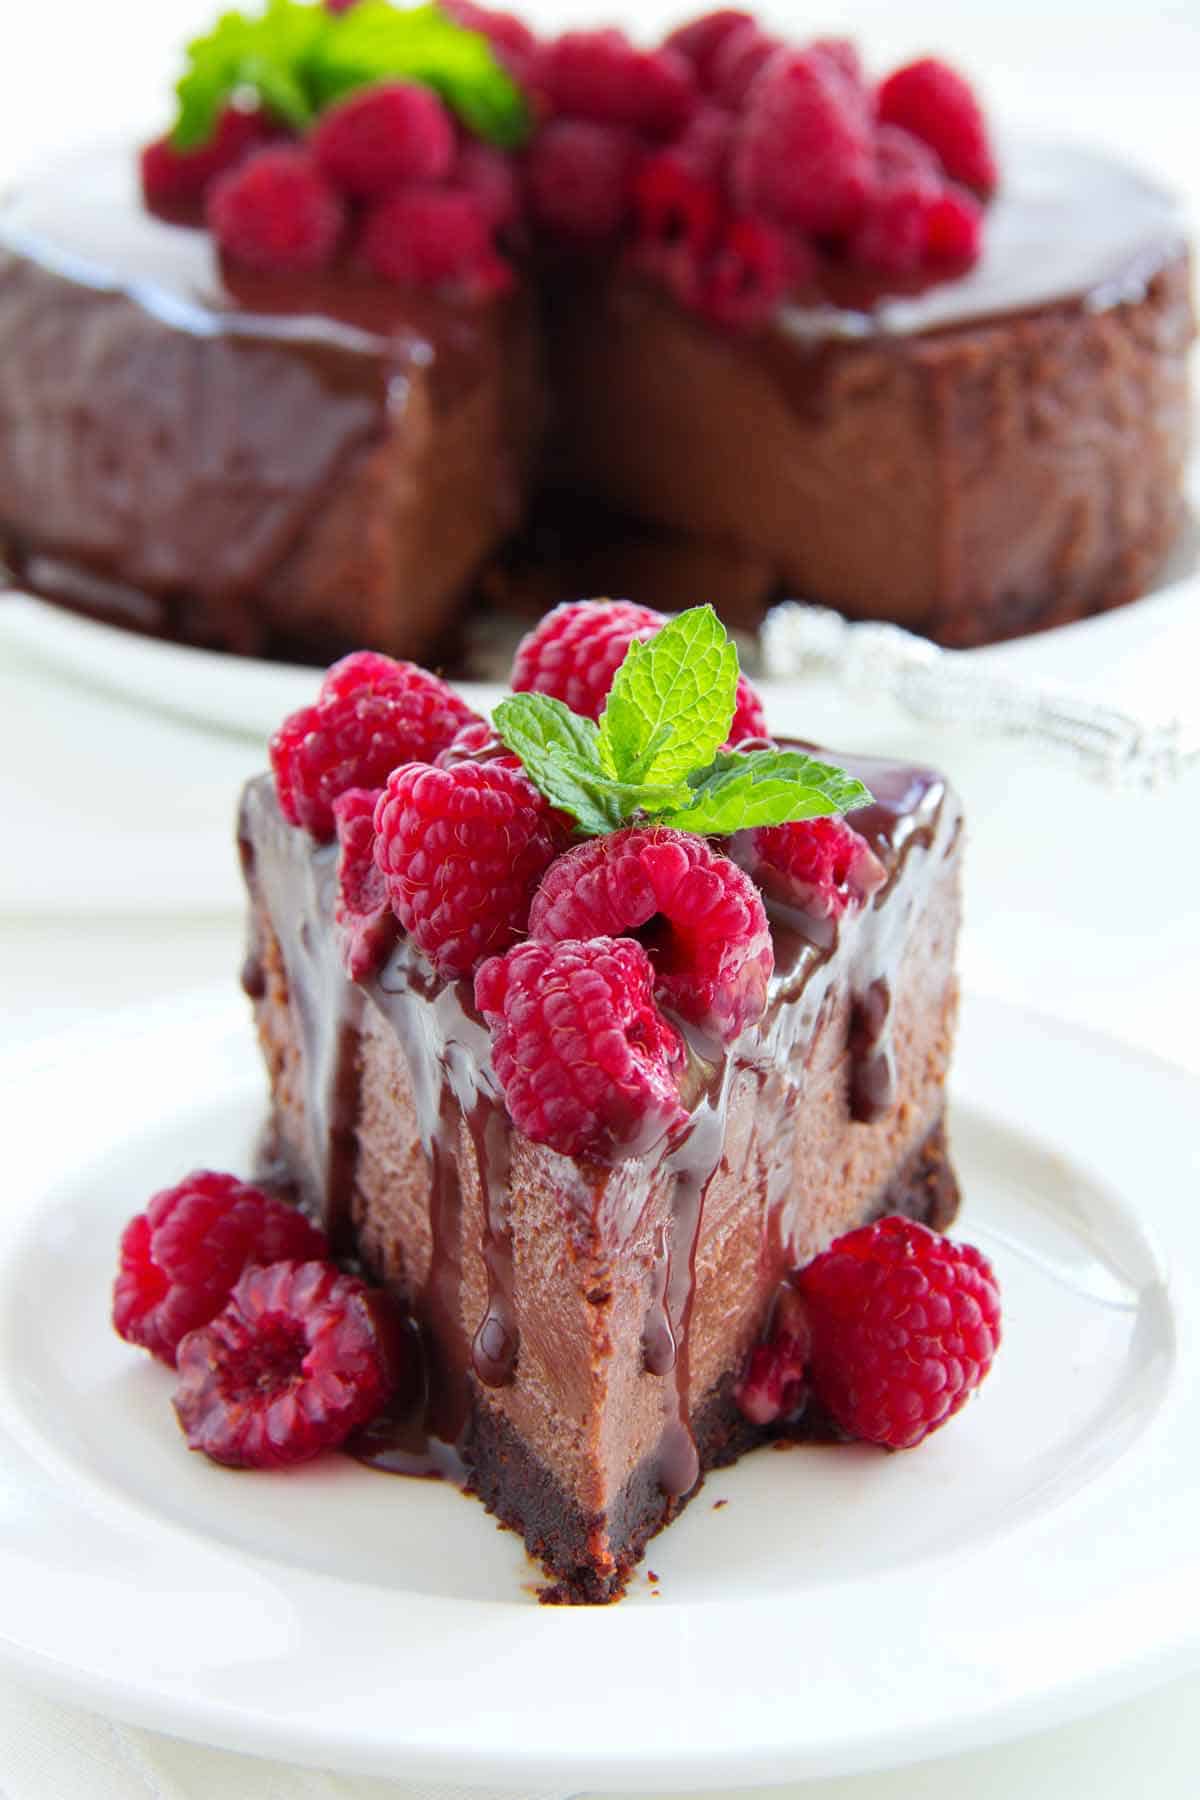 Plate of chocolate raspberry cheesecake with the rest of the cheesecake in the background.